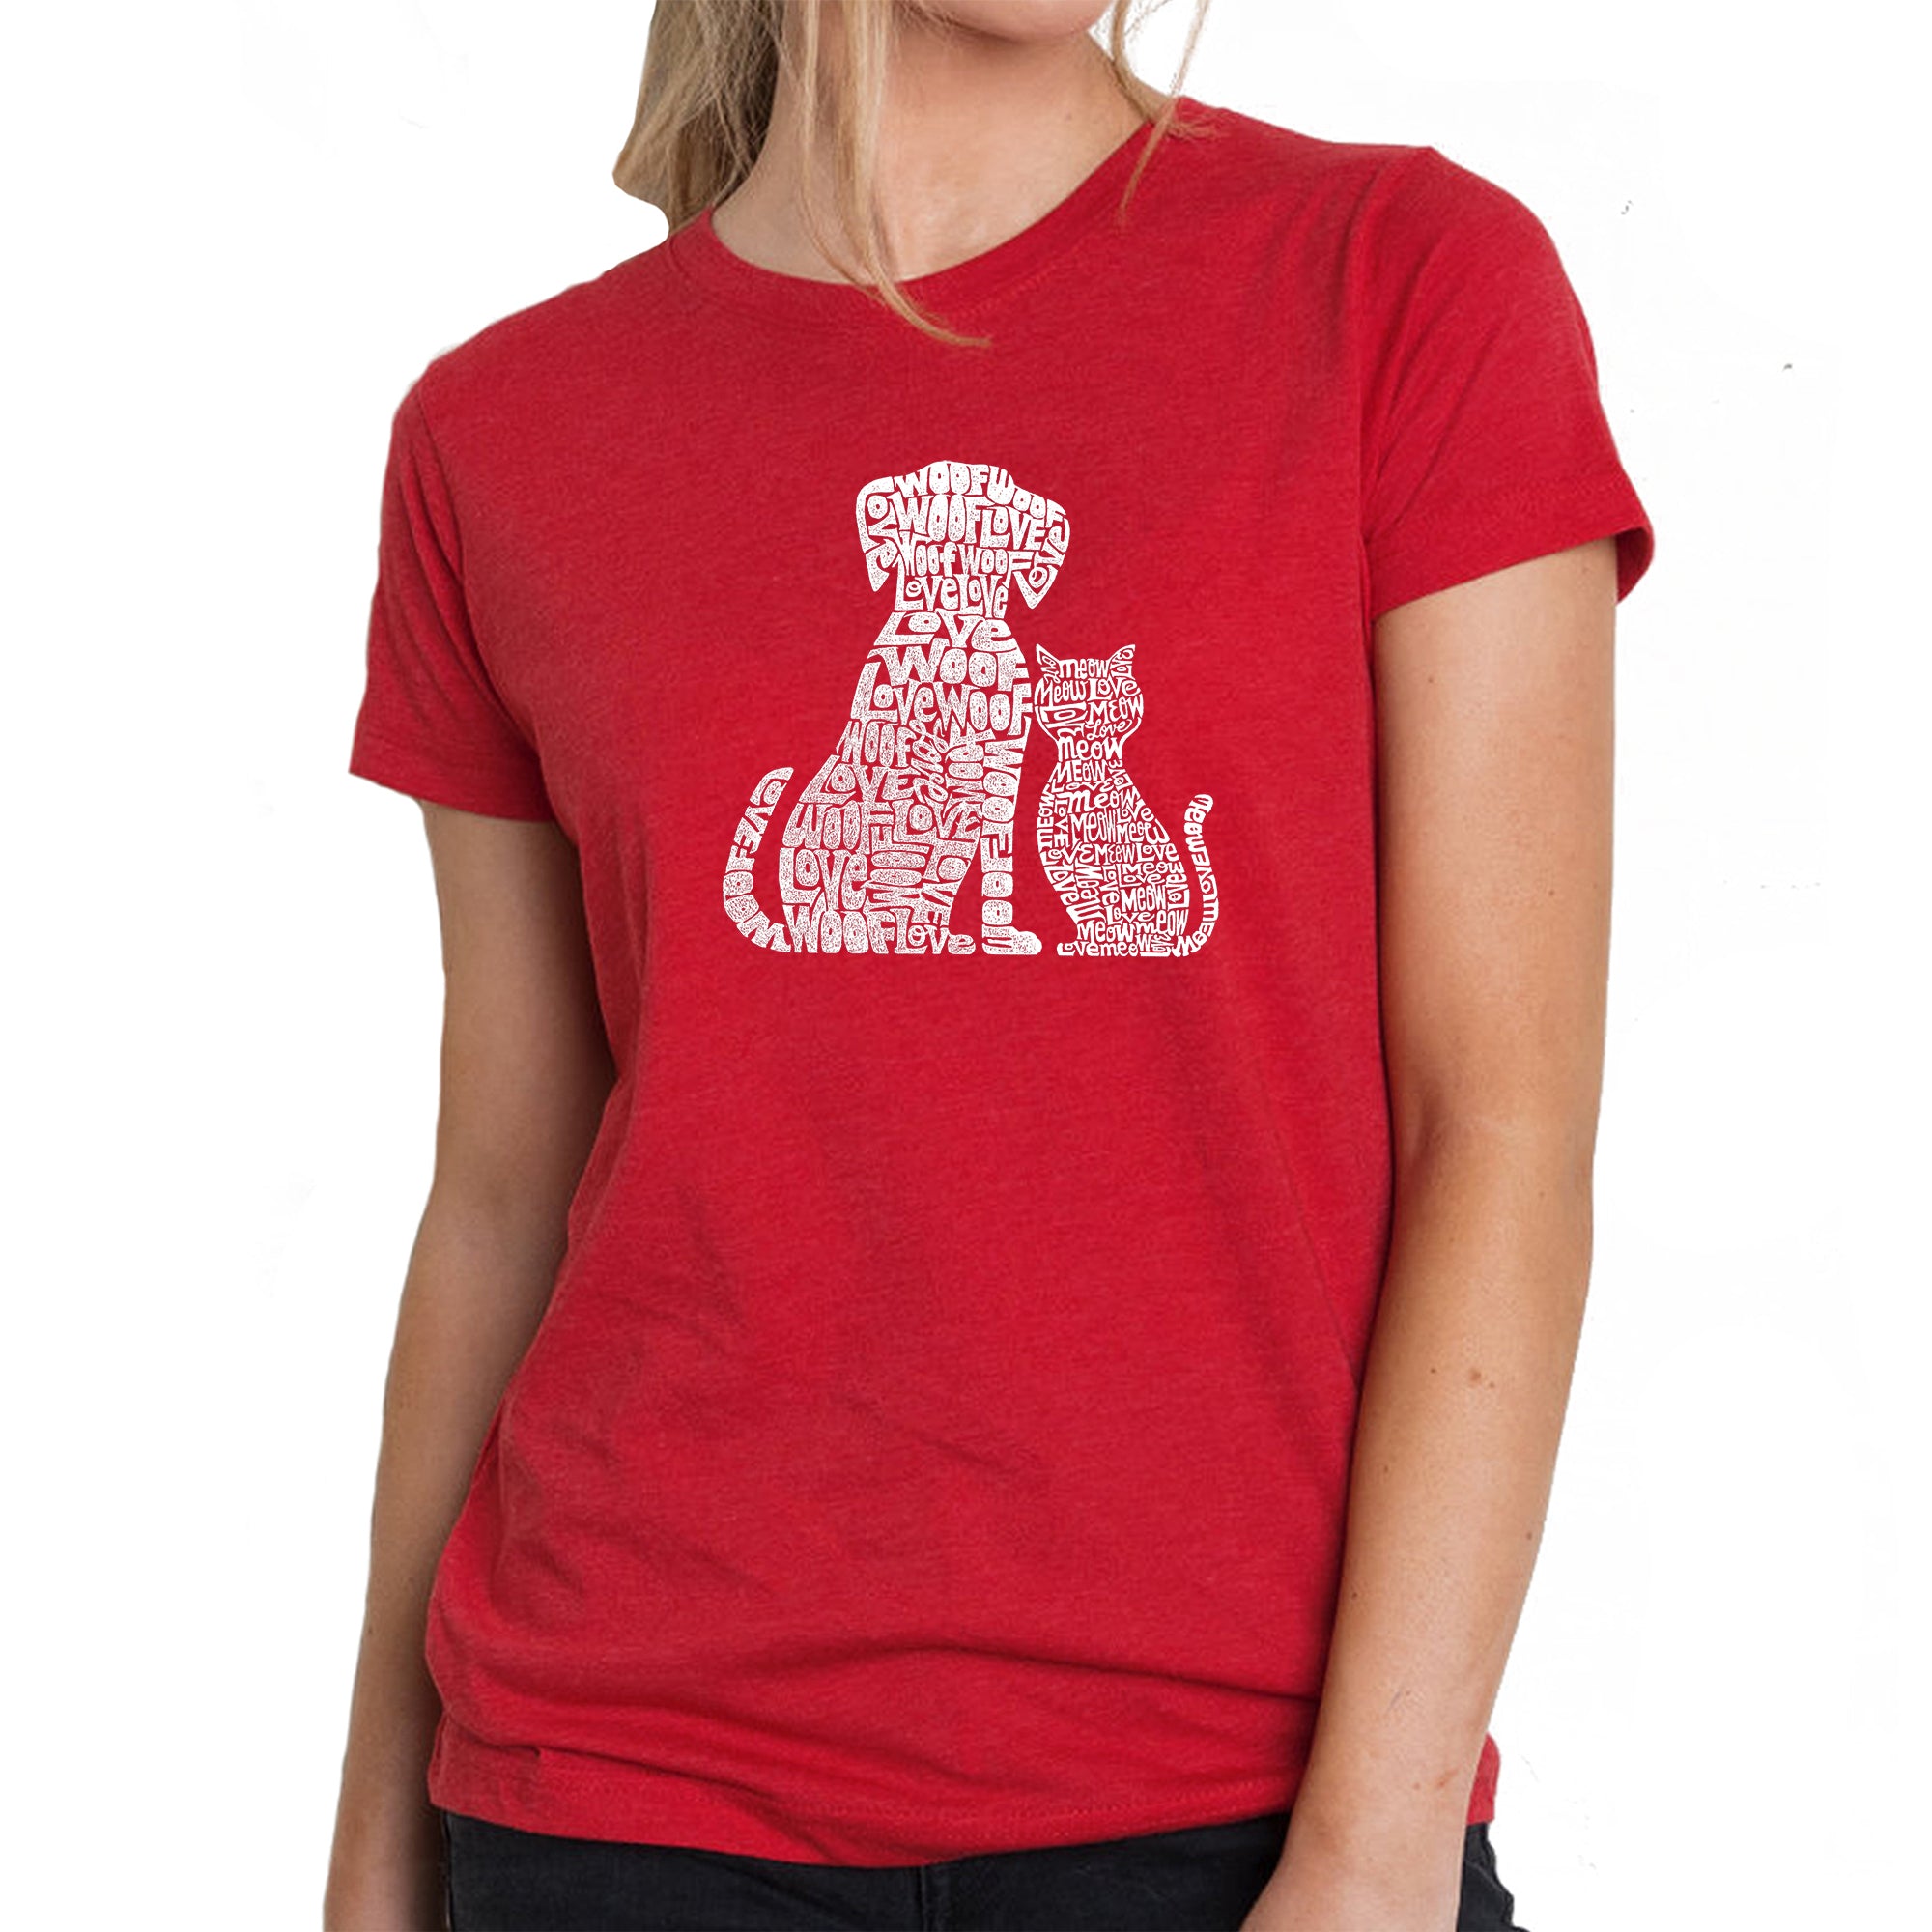 Dogs And Cats - Women's Premium Blend Word Art T-Shirt - Red - Small